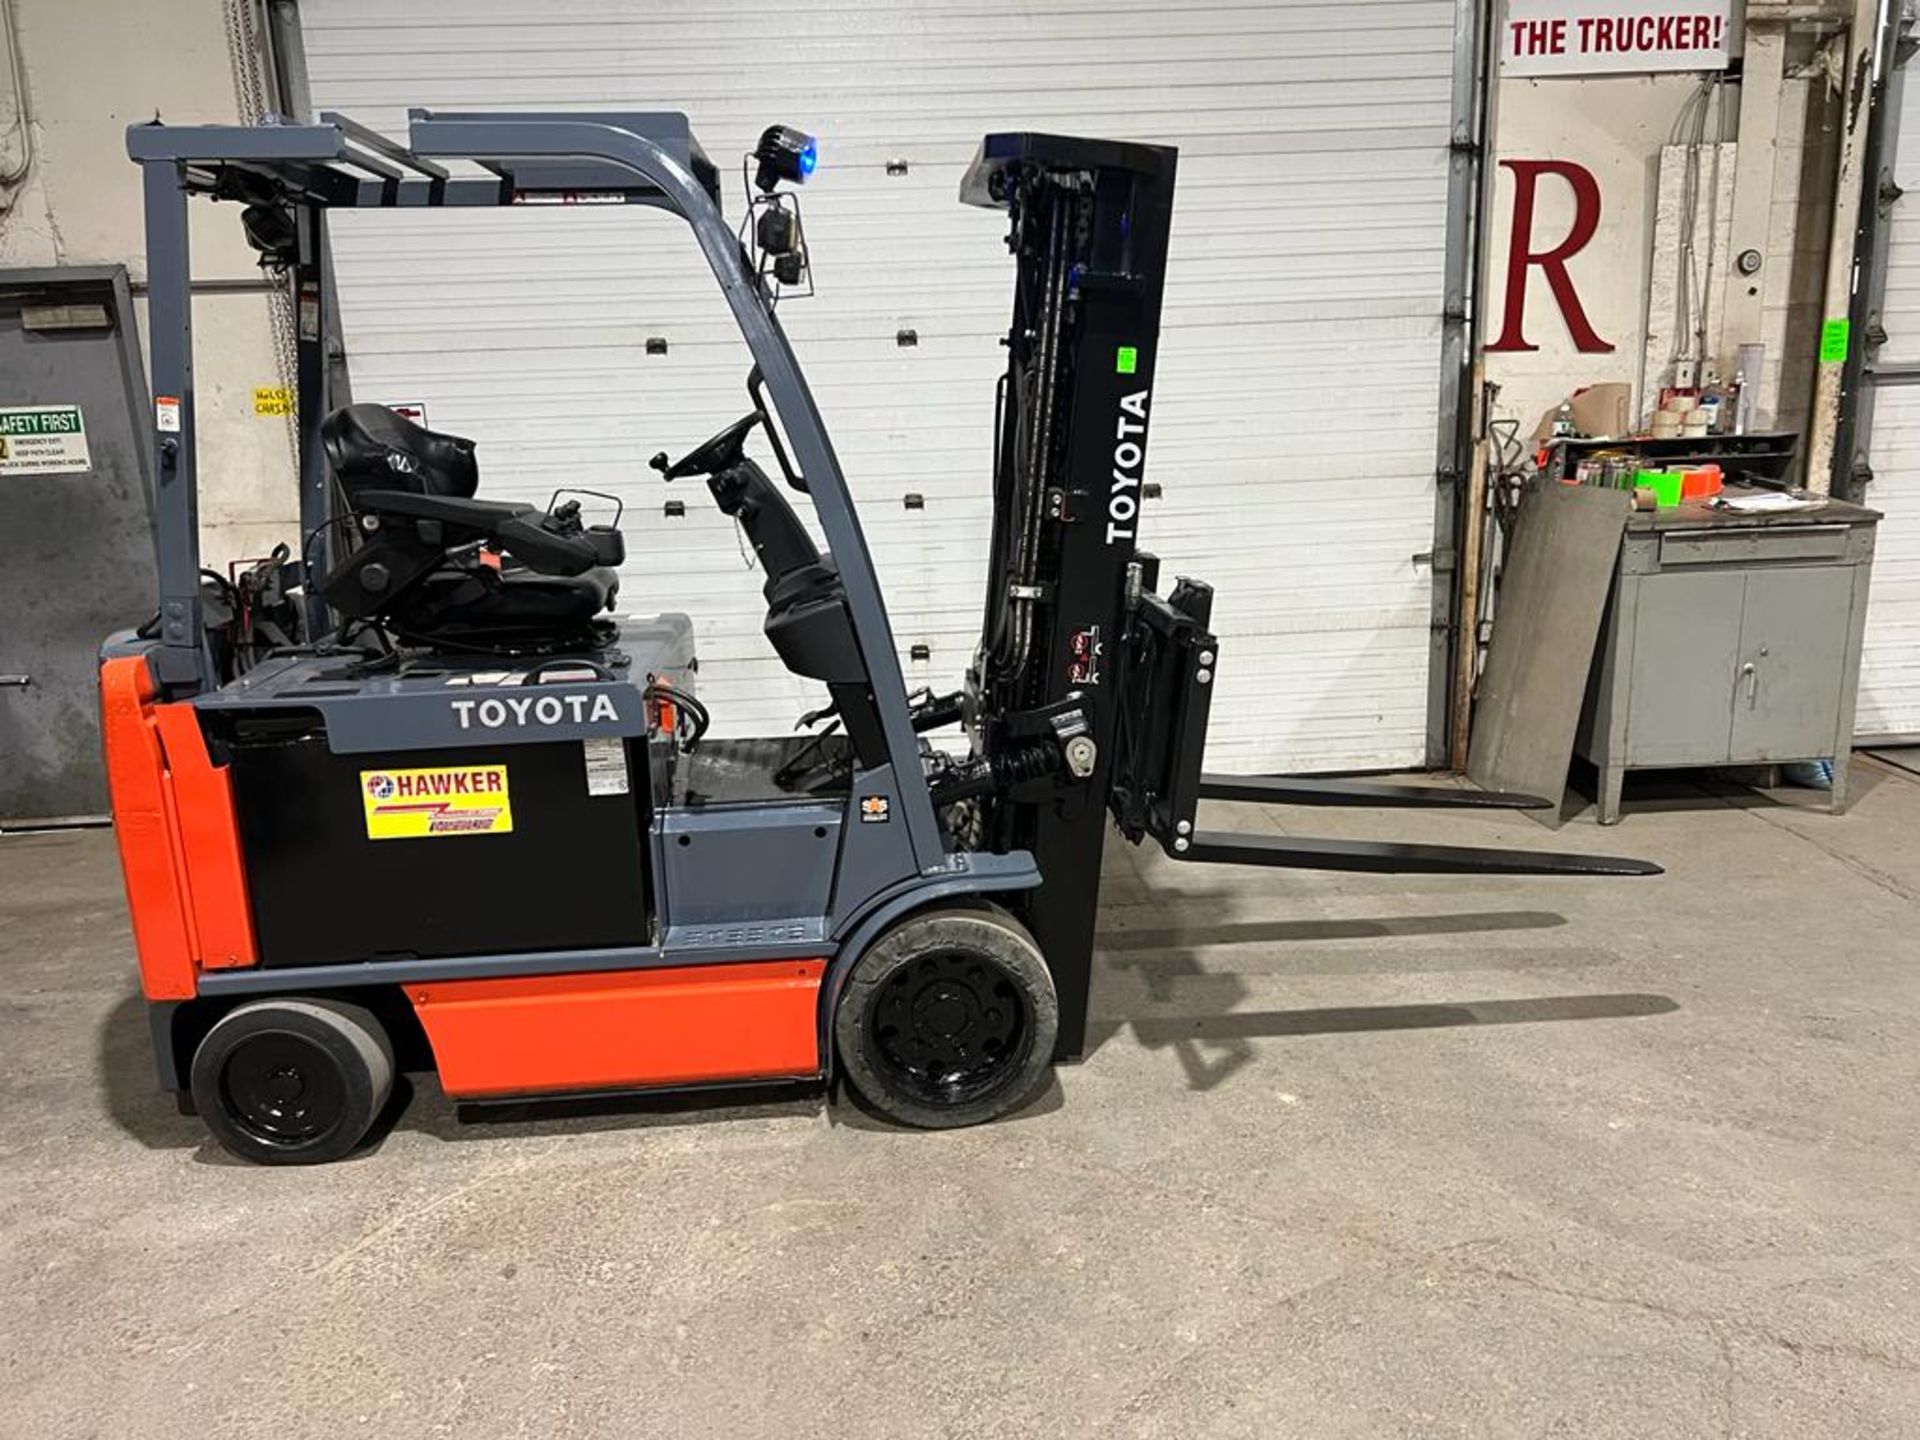 2015 Toyota 6,000lbs Capacity Electric Forklift with Sideshift & Plumbed for Fork Positioner - 48V